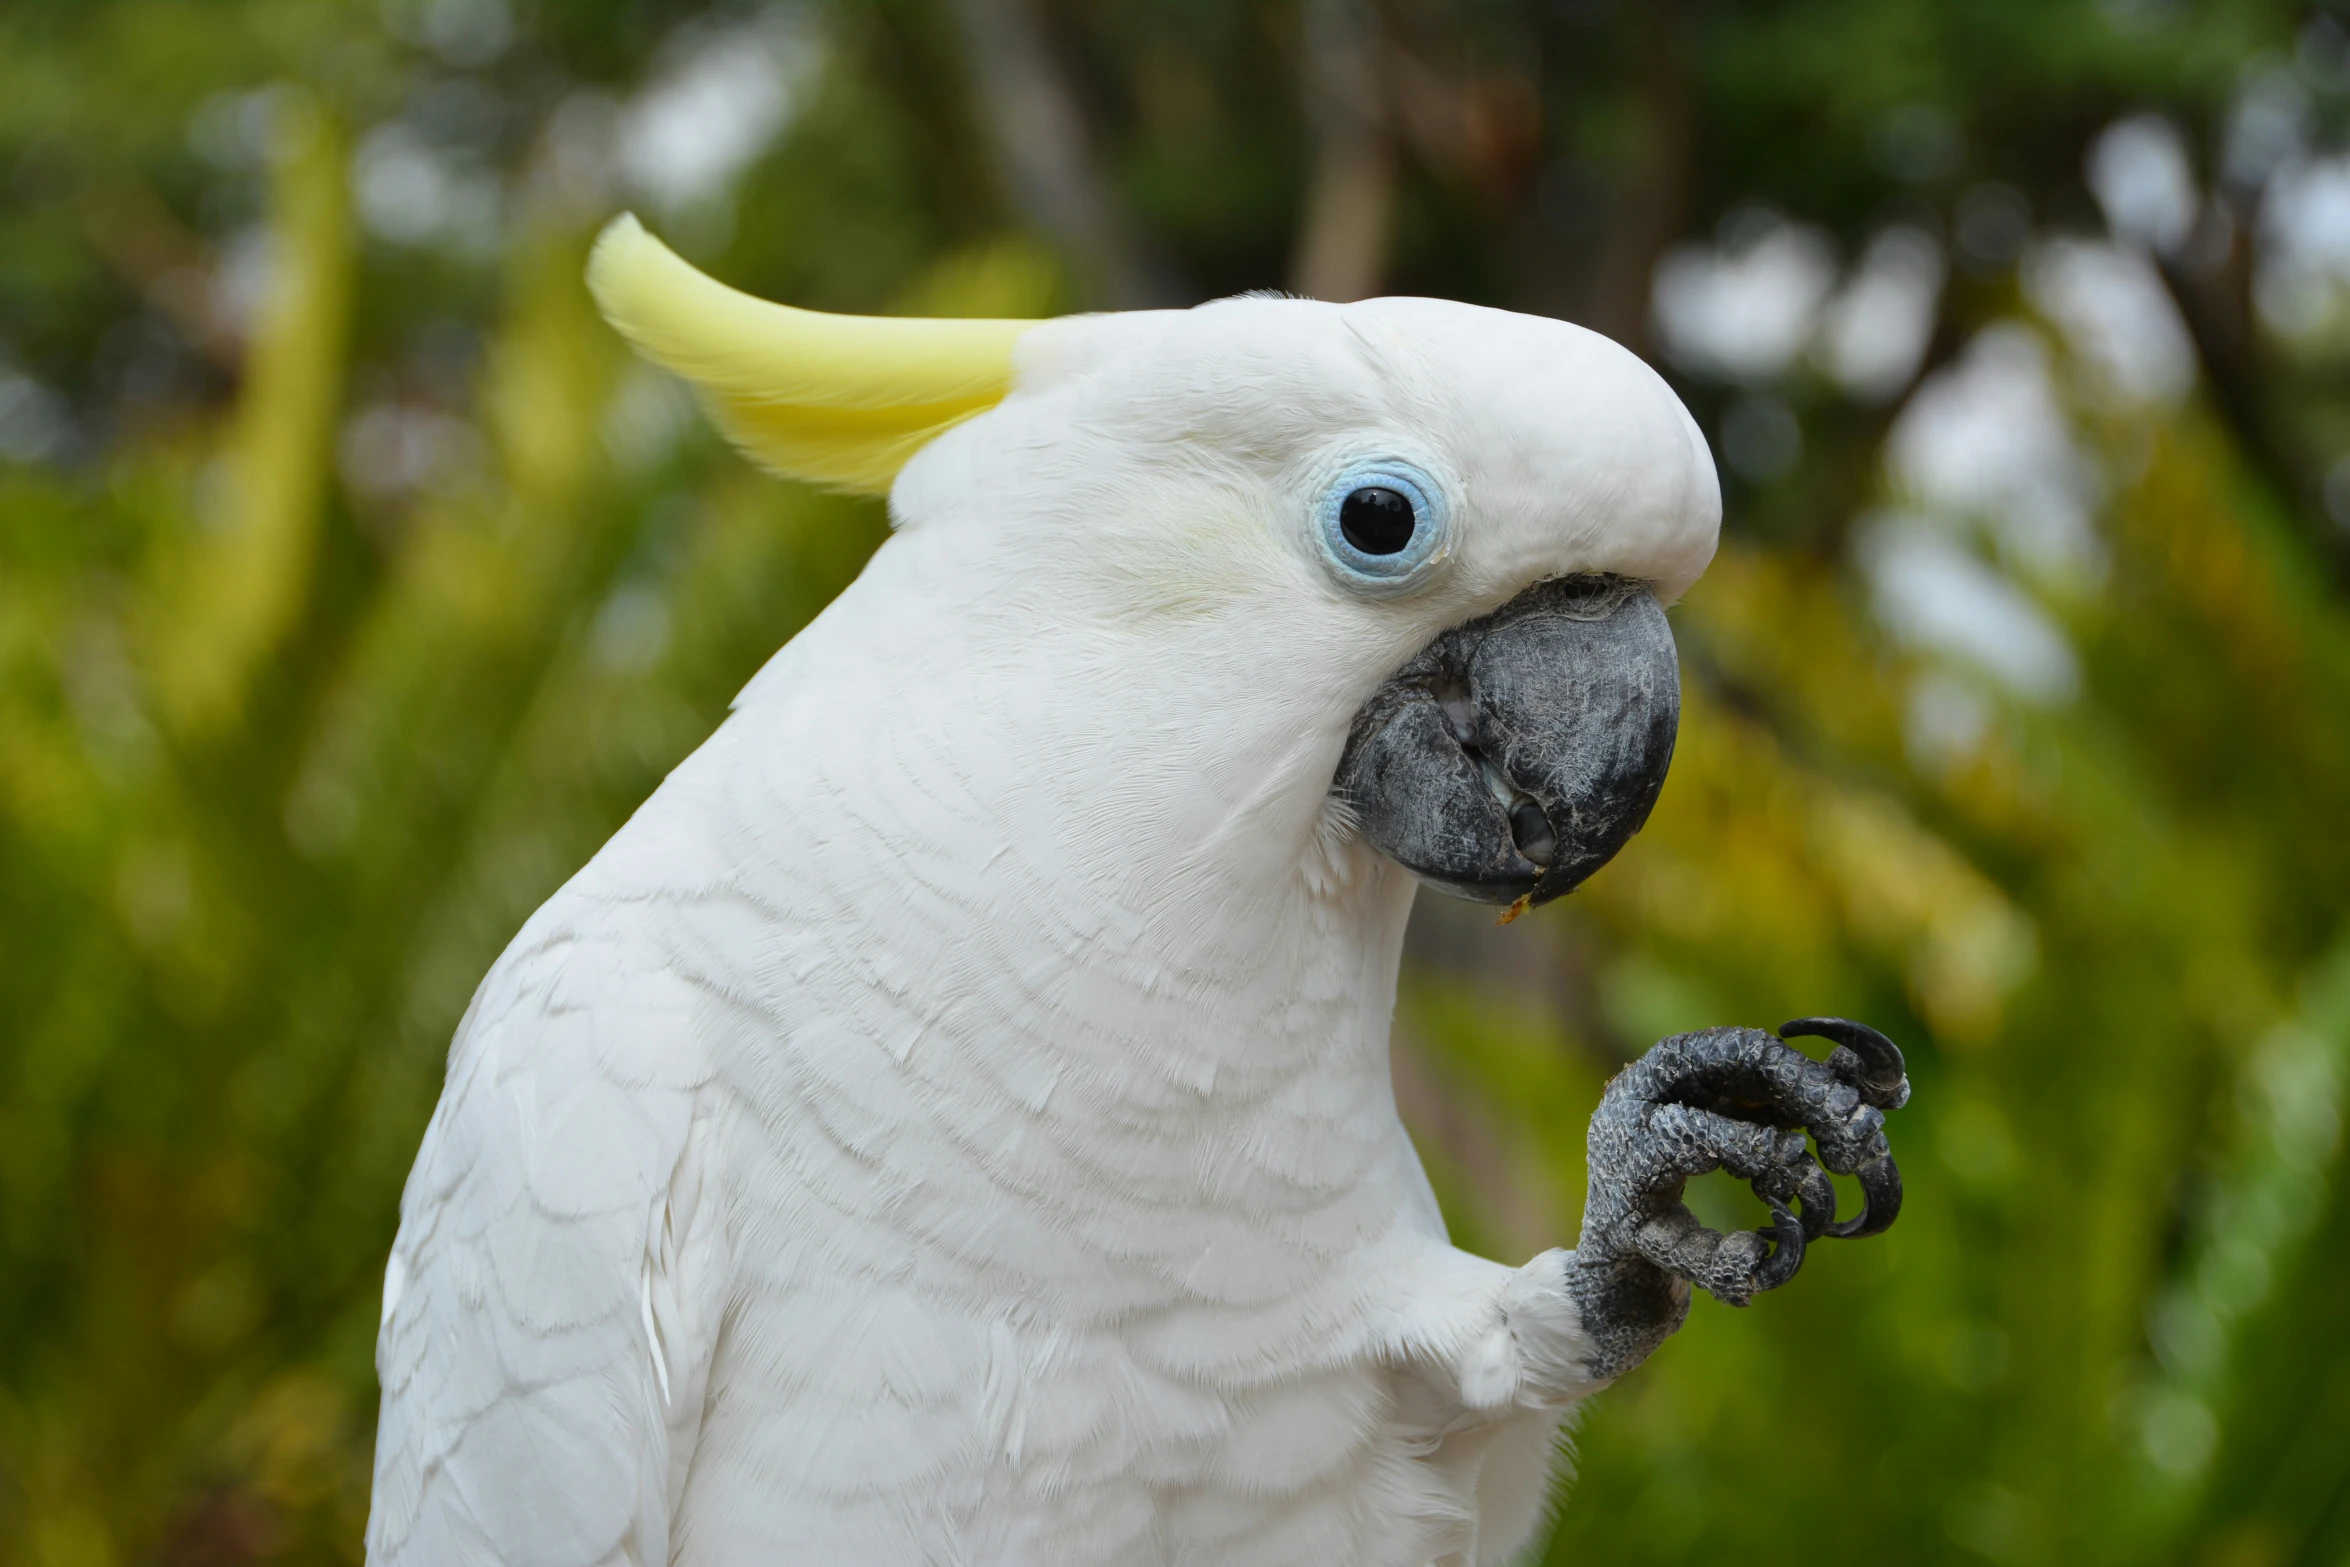 a white bird with yellow feathers is shown